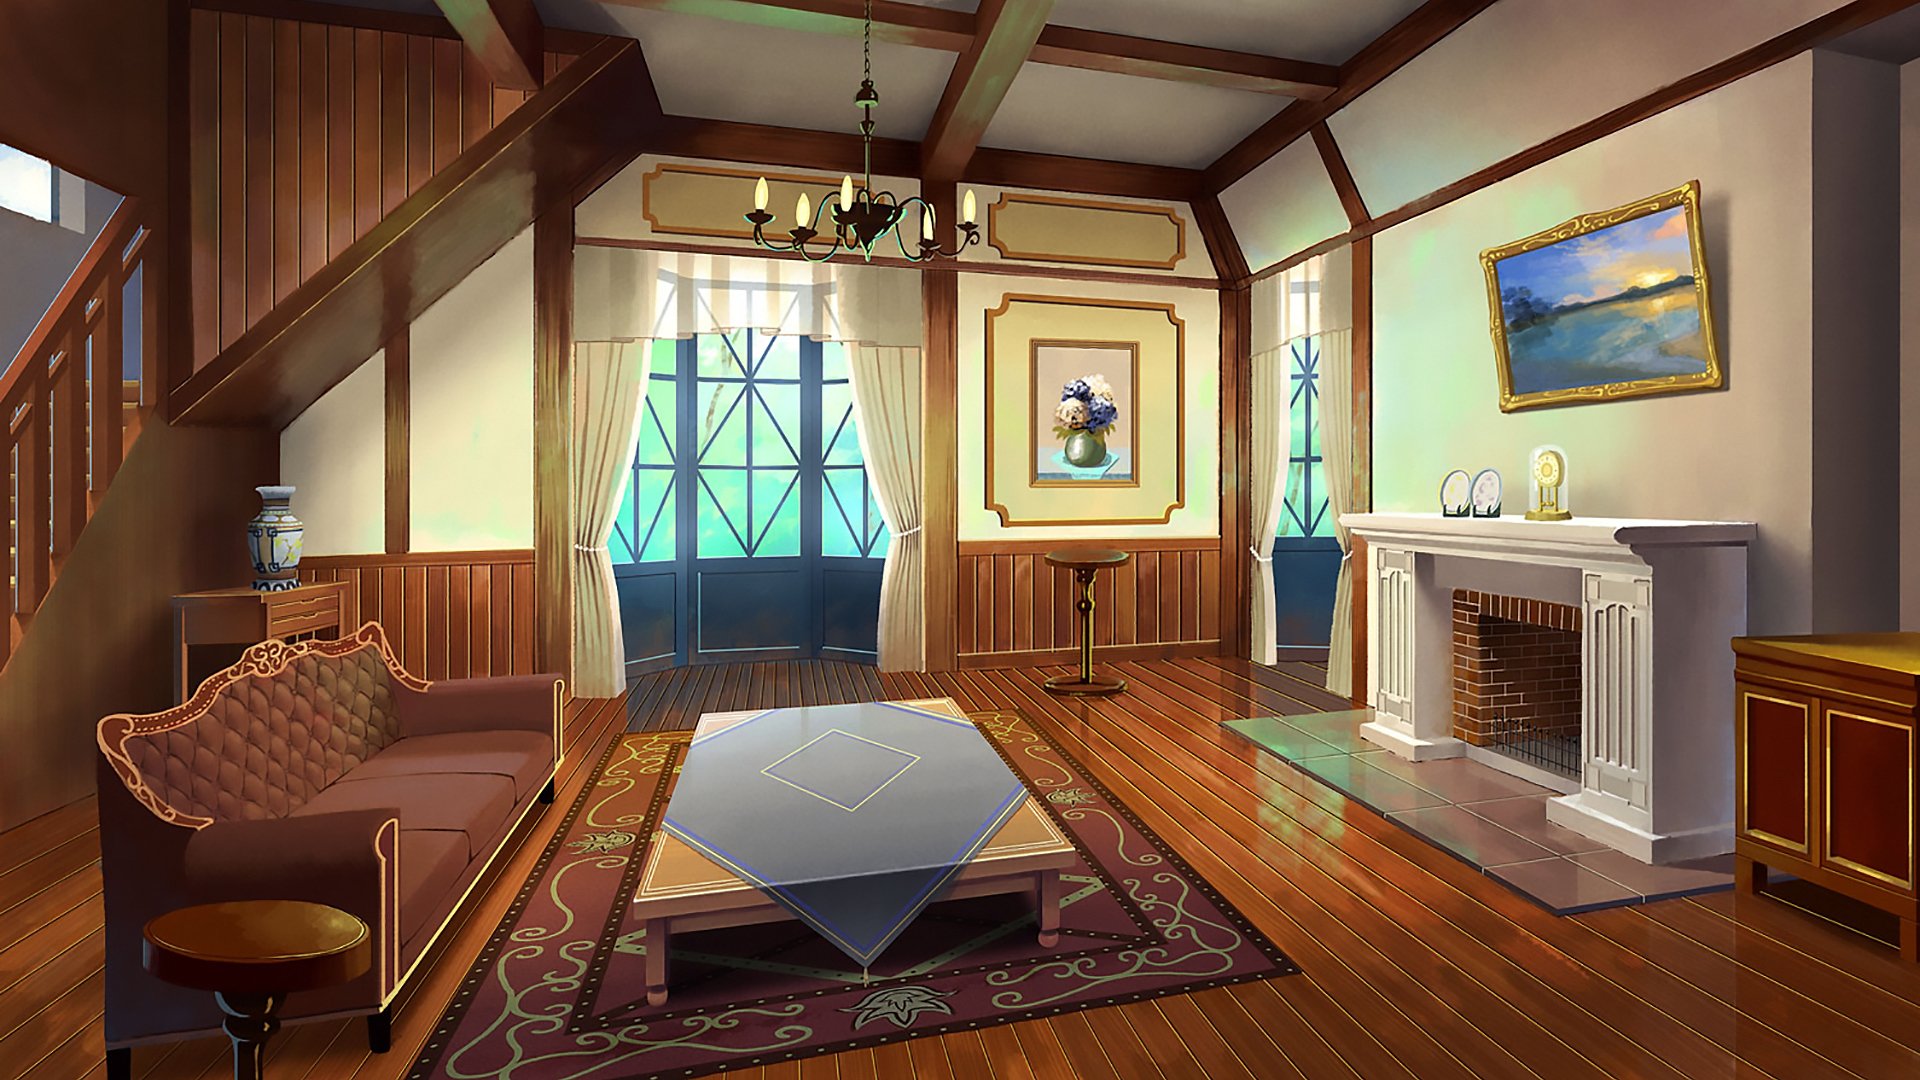 Anime Room CAS Backgrounds - The Sims 4 Mods - CurseForge